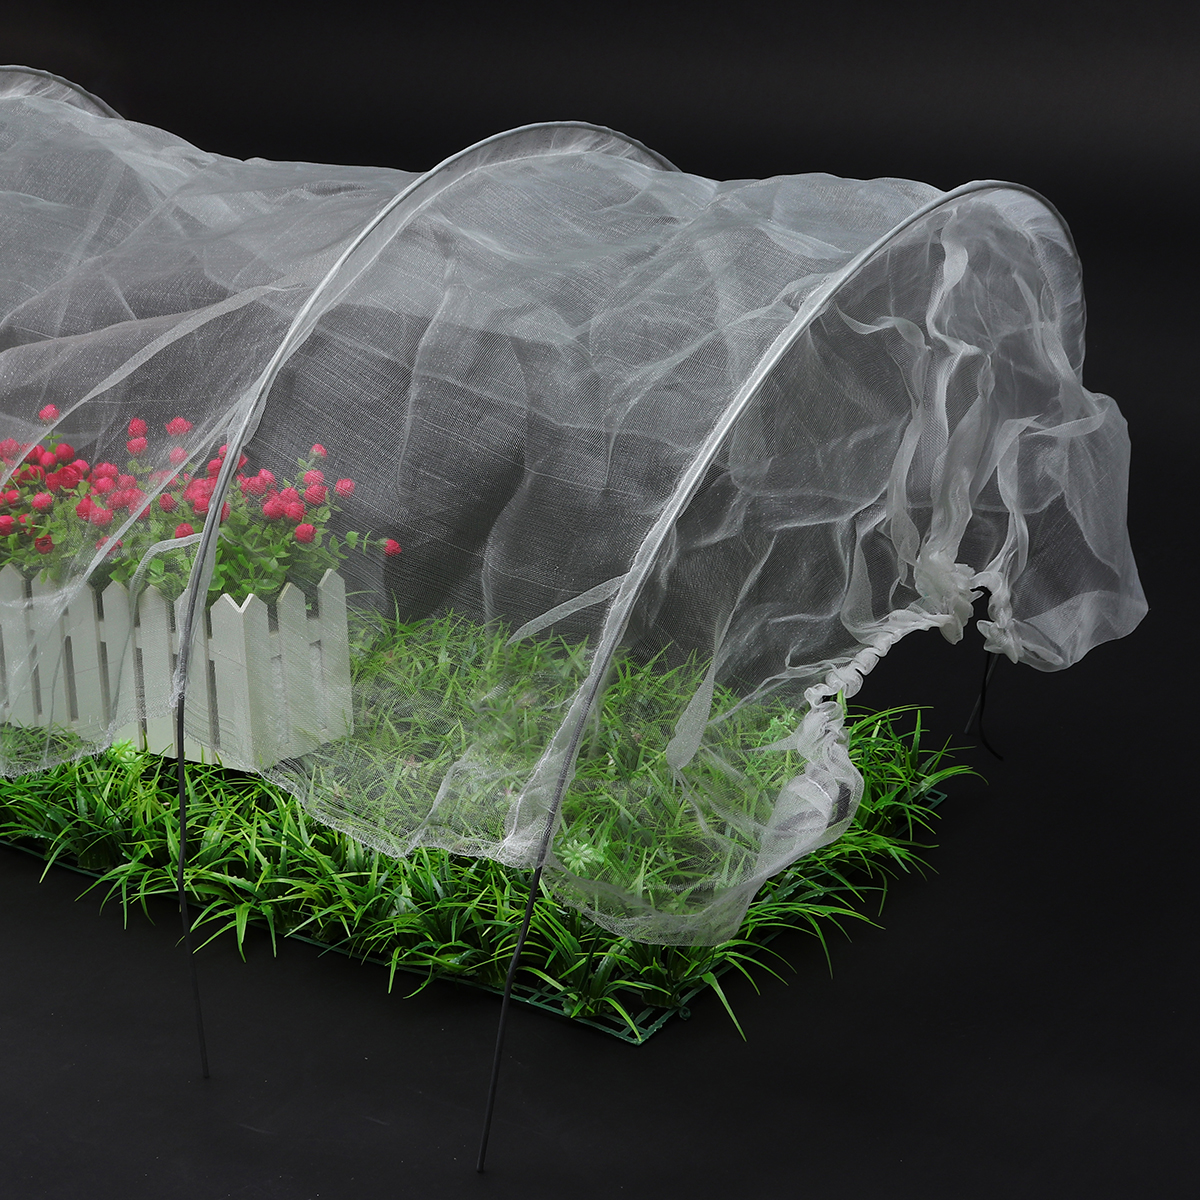 Plant-Net-Shade-Insect-Bird-Barrier-Netting-Garden-Greenhouse-Cover-Protect-Mesh-1606544-1